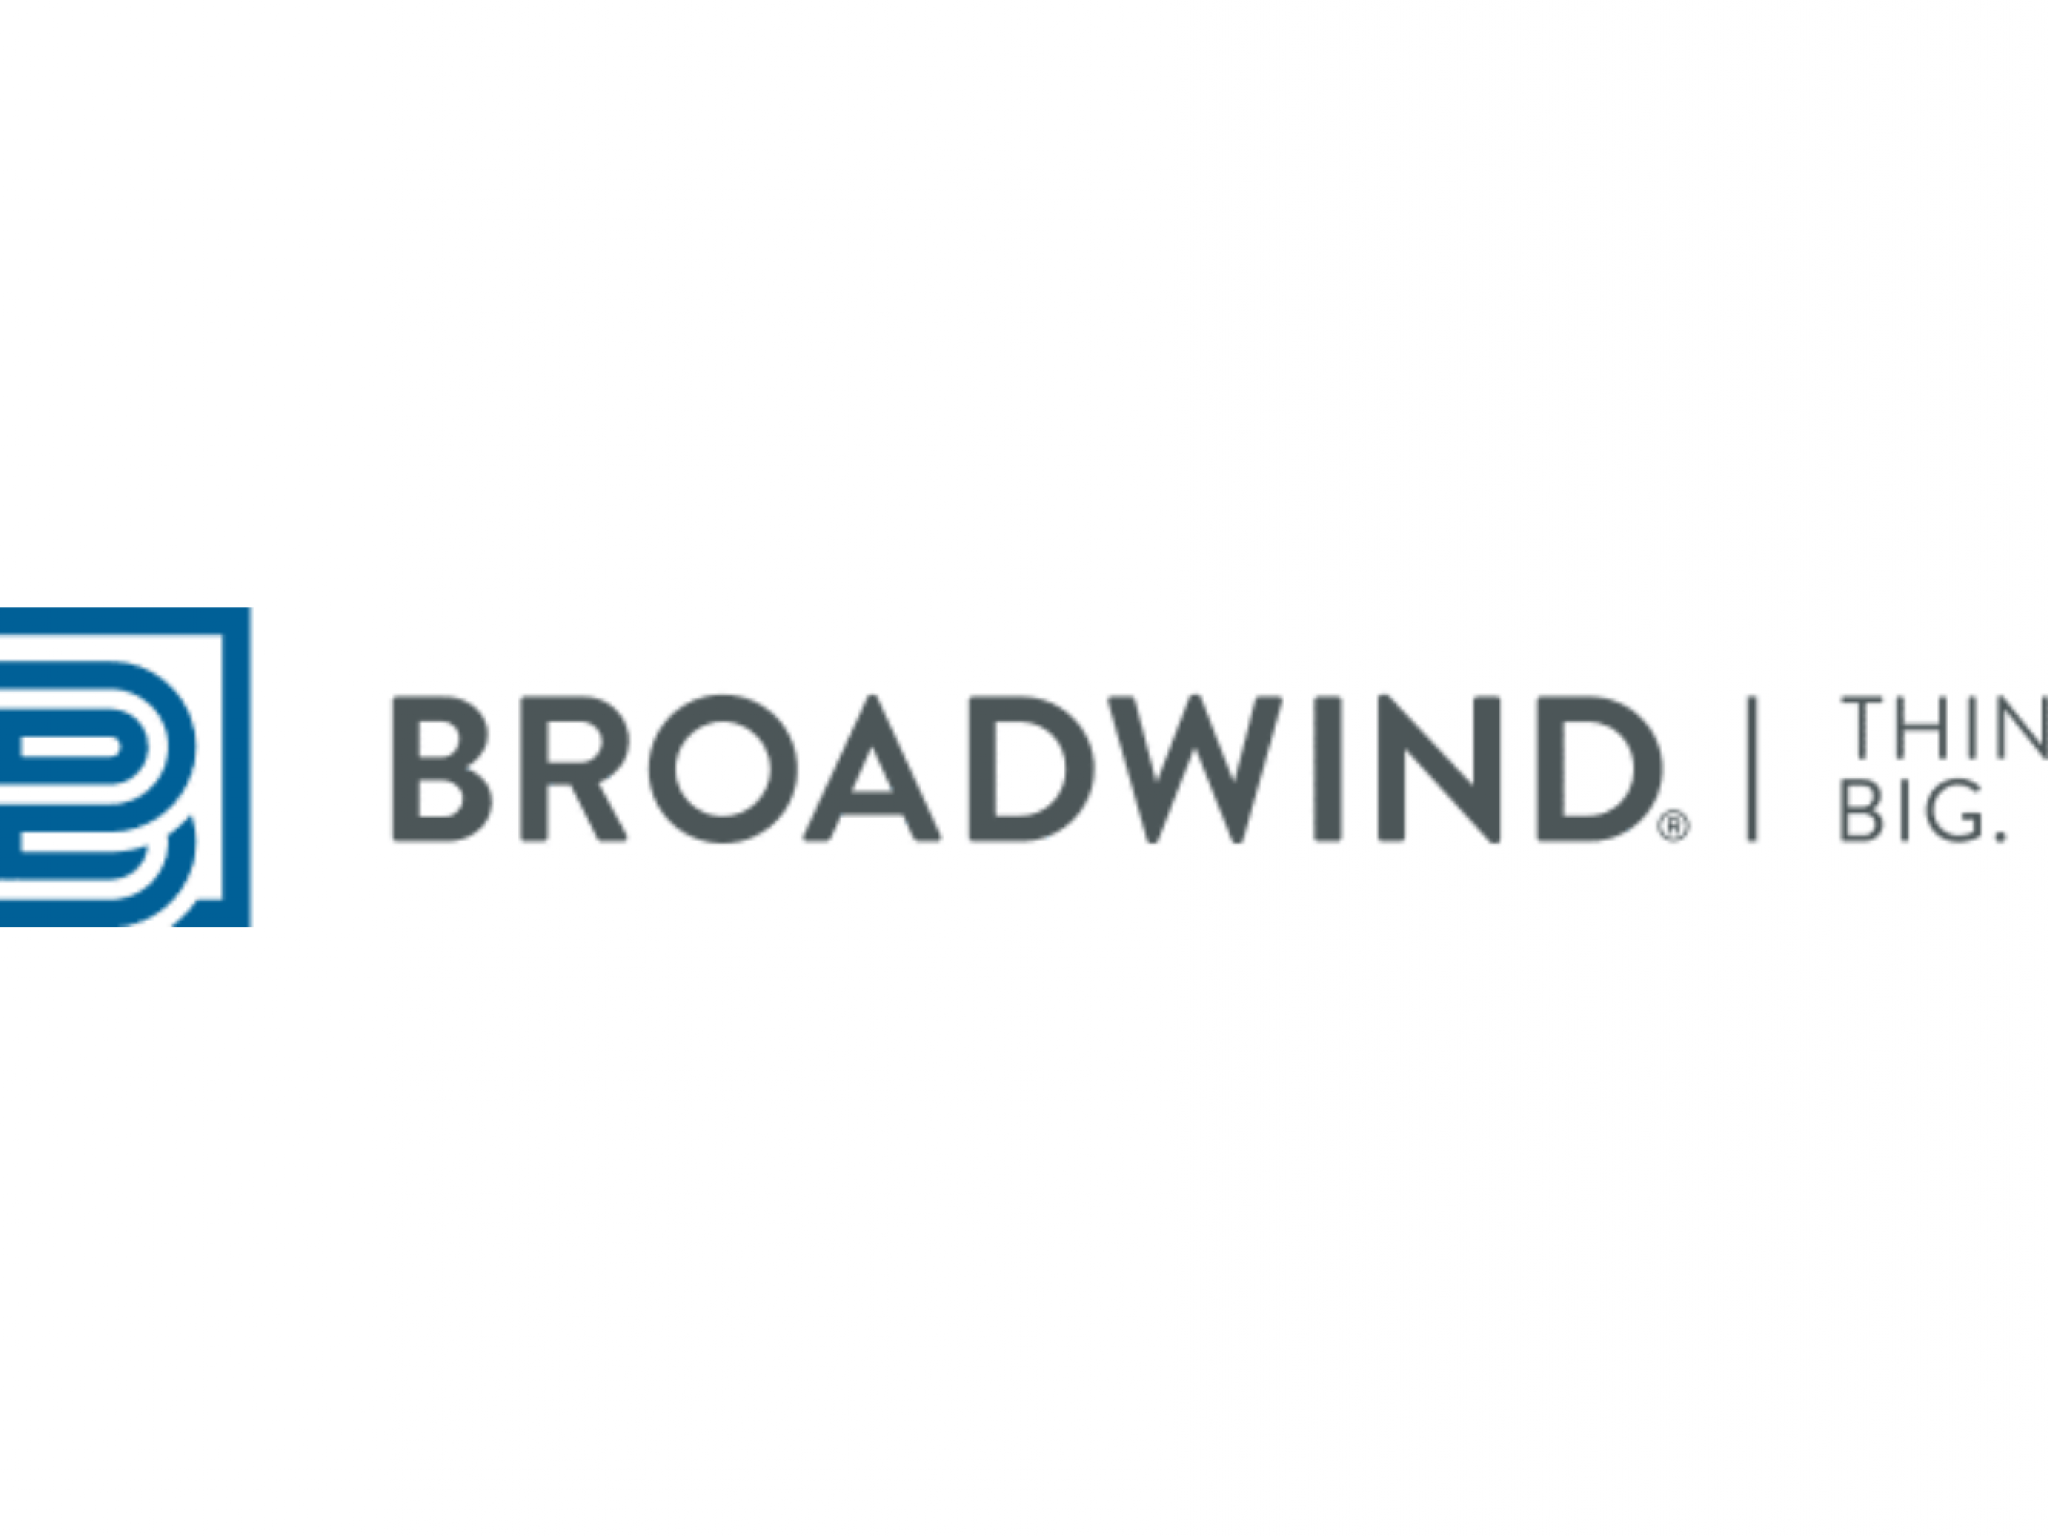  specialized-components-maker-broadwind-sells-15m-of-manufacturing-tax-credits-details 